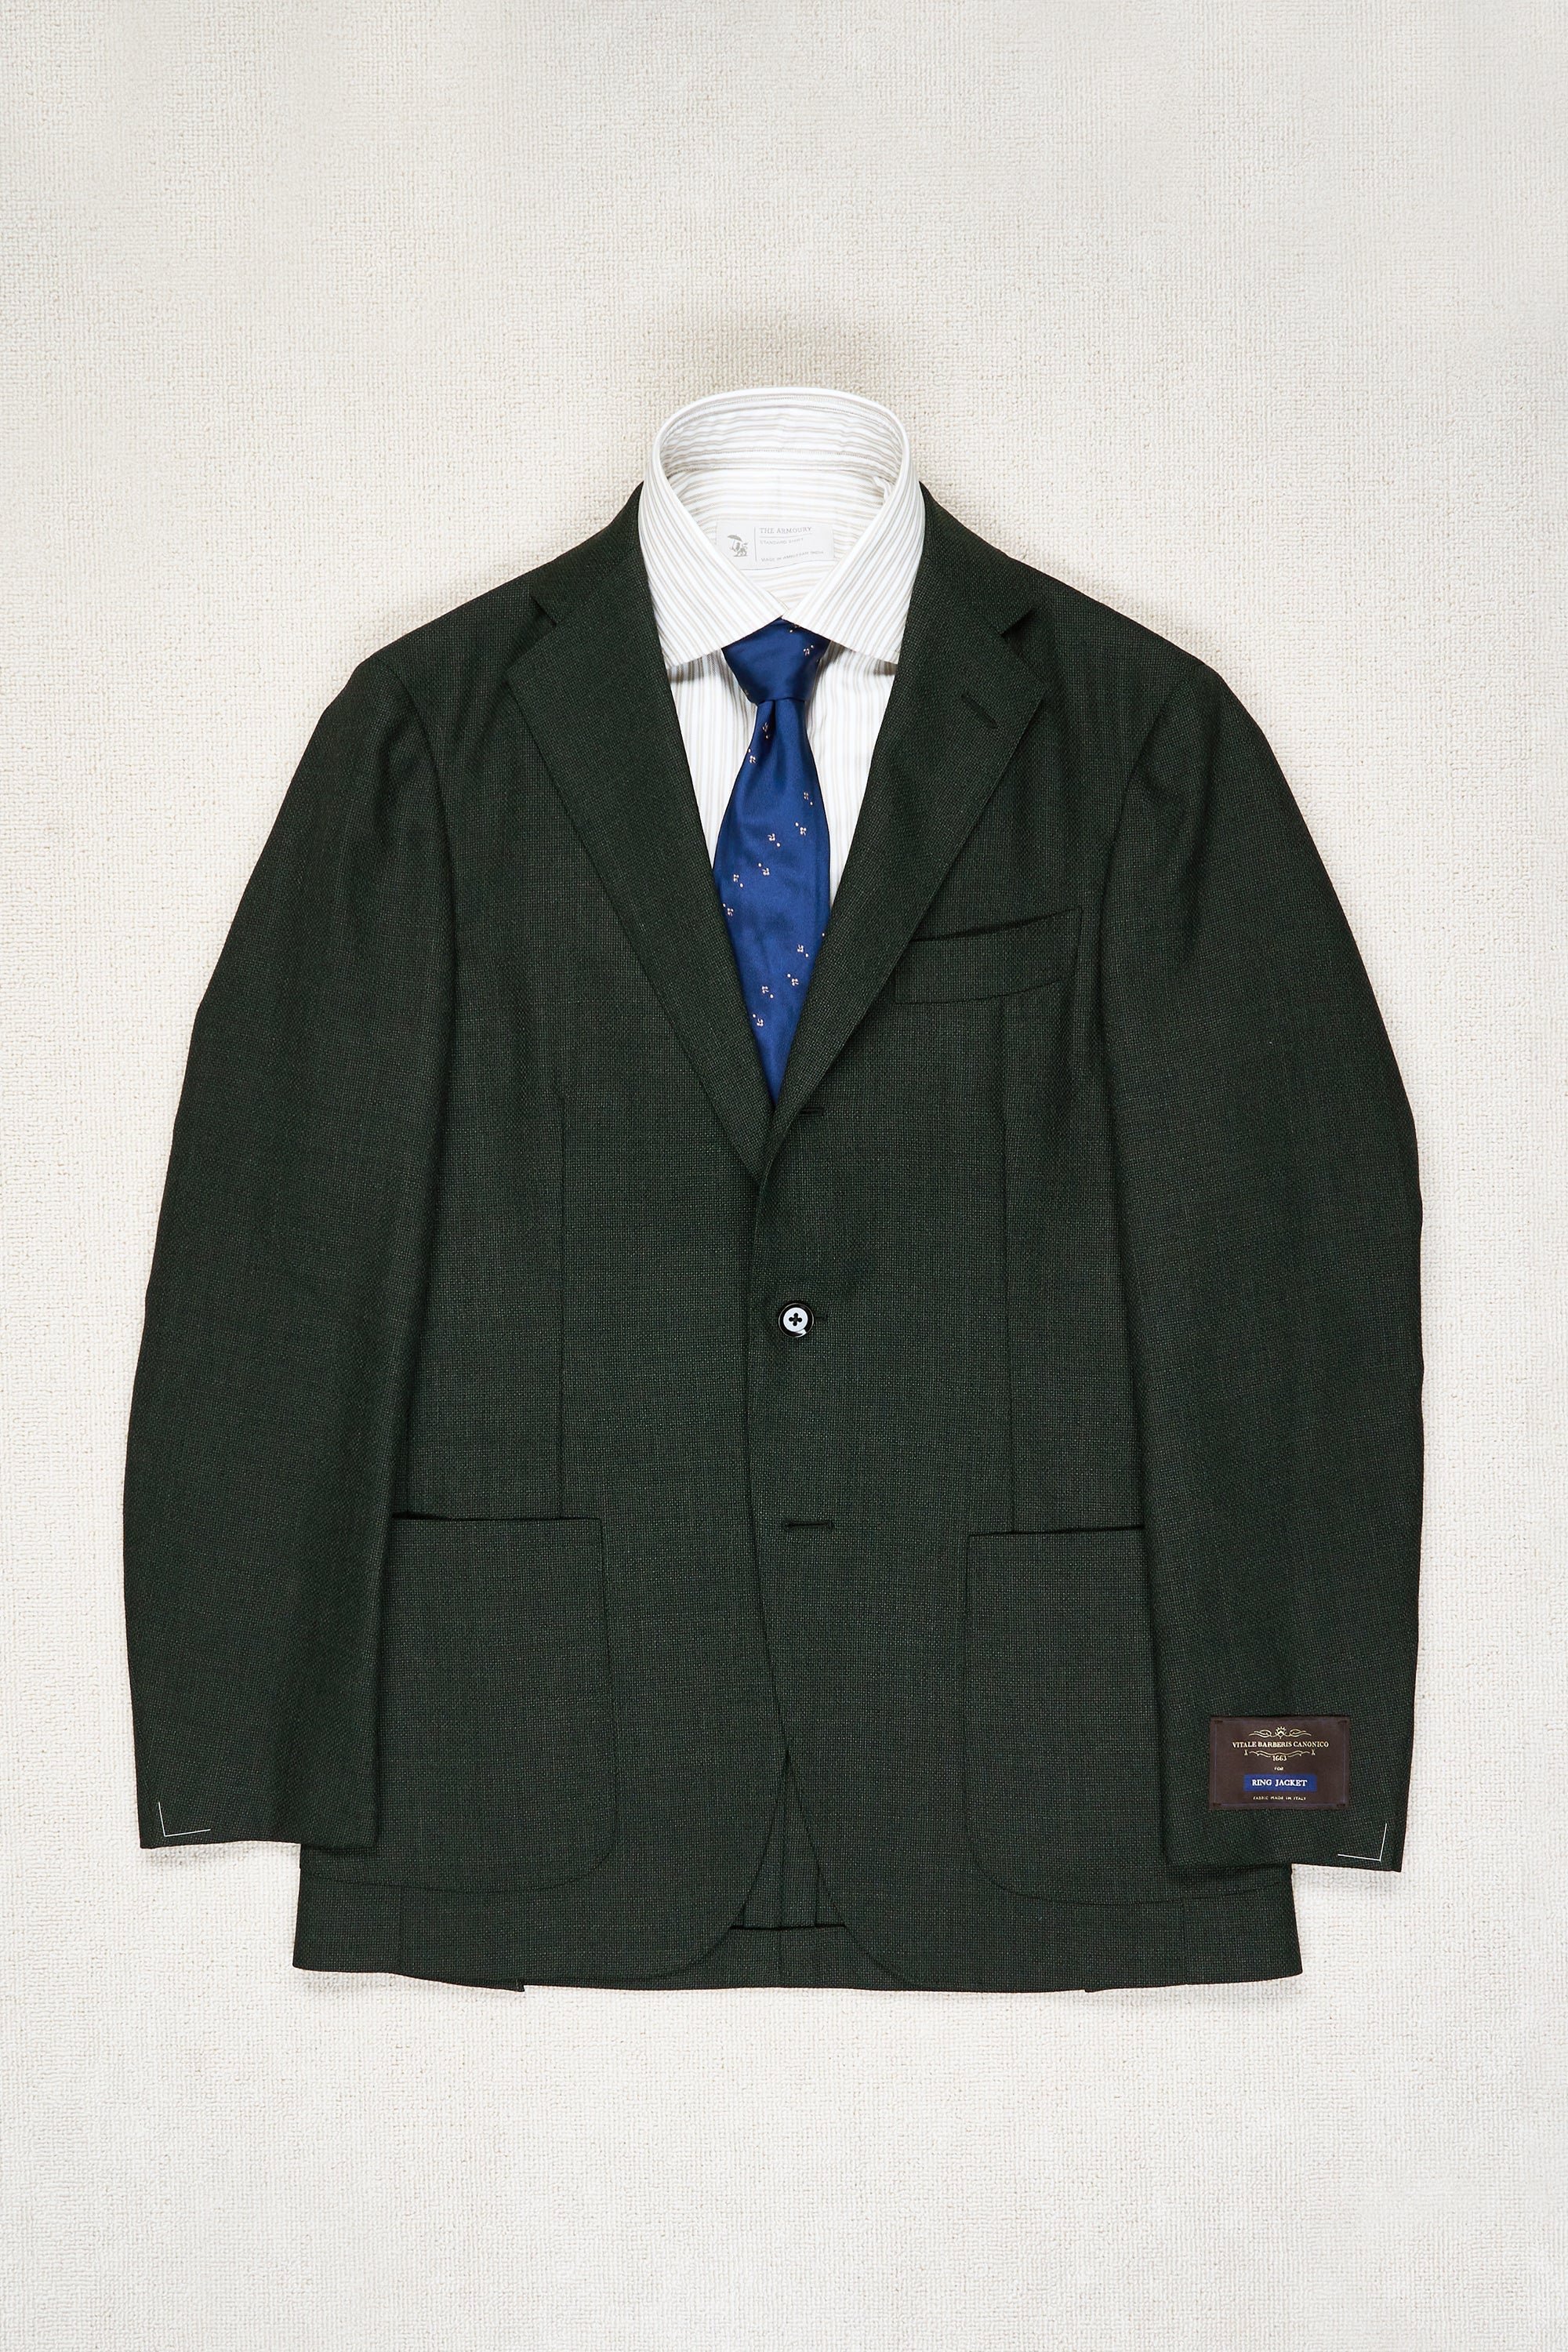 Ring Jacket 184 Forest Green Wool Sport Coat